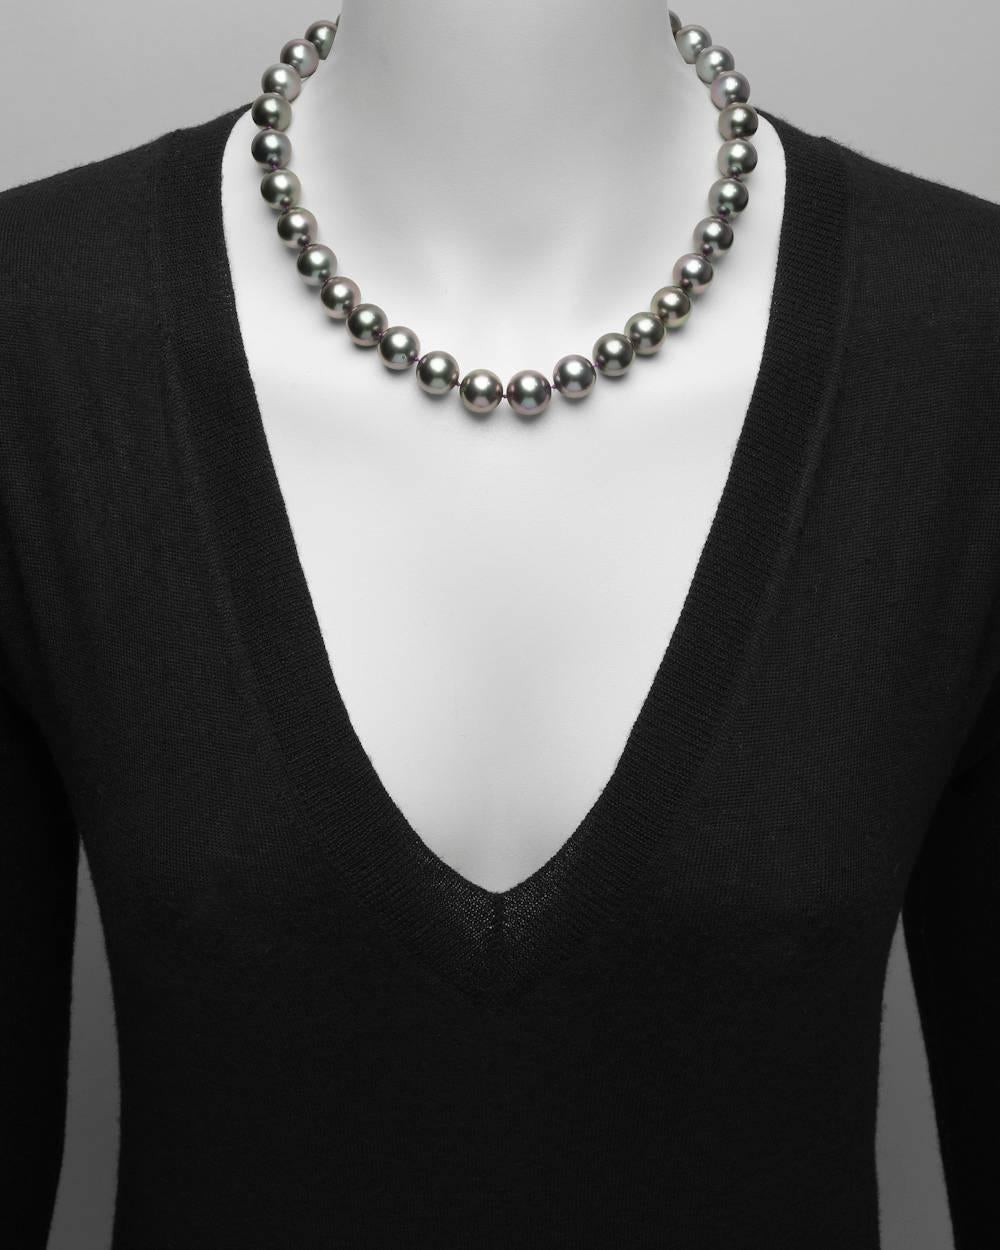 Tahitian pearl necklace, composed of 33 dark gray cultured Tahitian pearls with pink overtones ranging from 13.2 to 12mm in diameter and strung on a silk cord, secured by an oval-shaped clasp pavé-set with 120 round brilliant-cut diamonds weighing